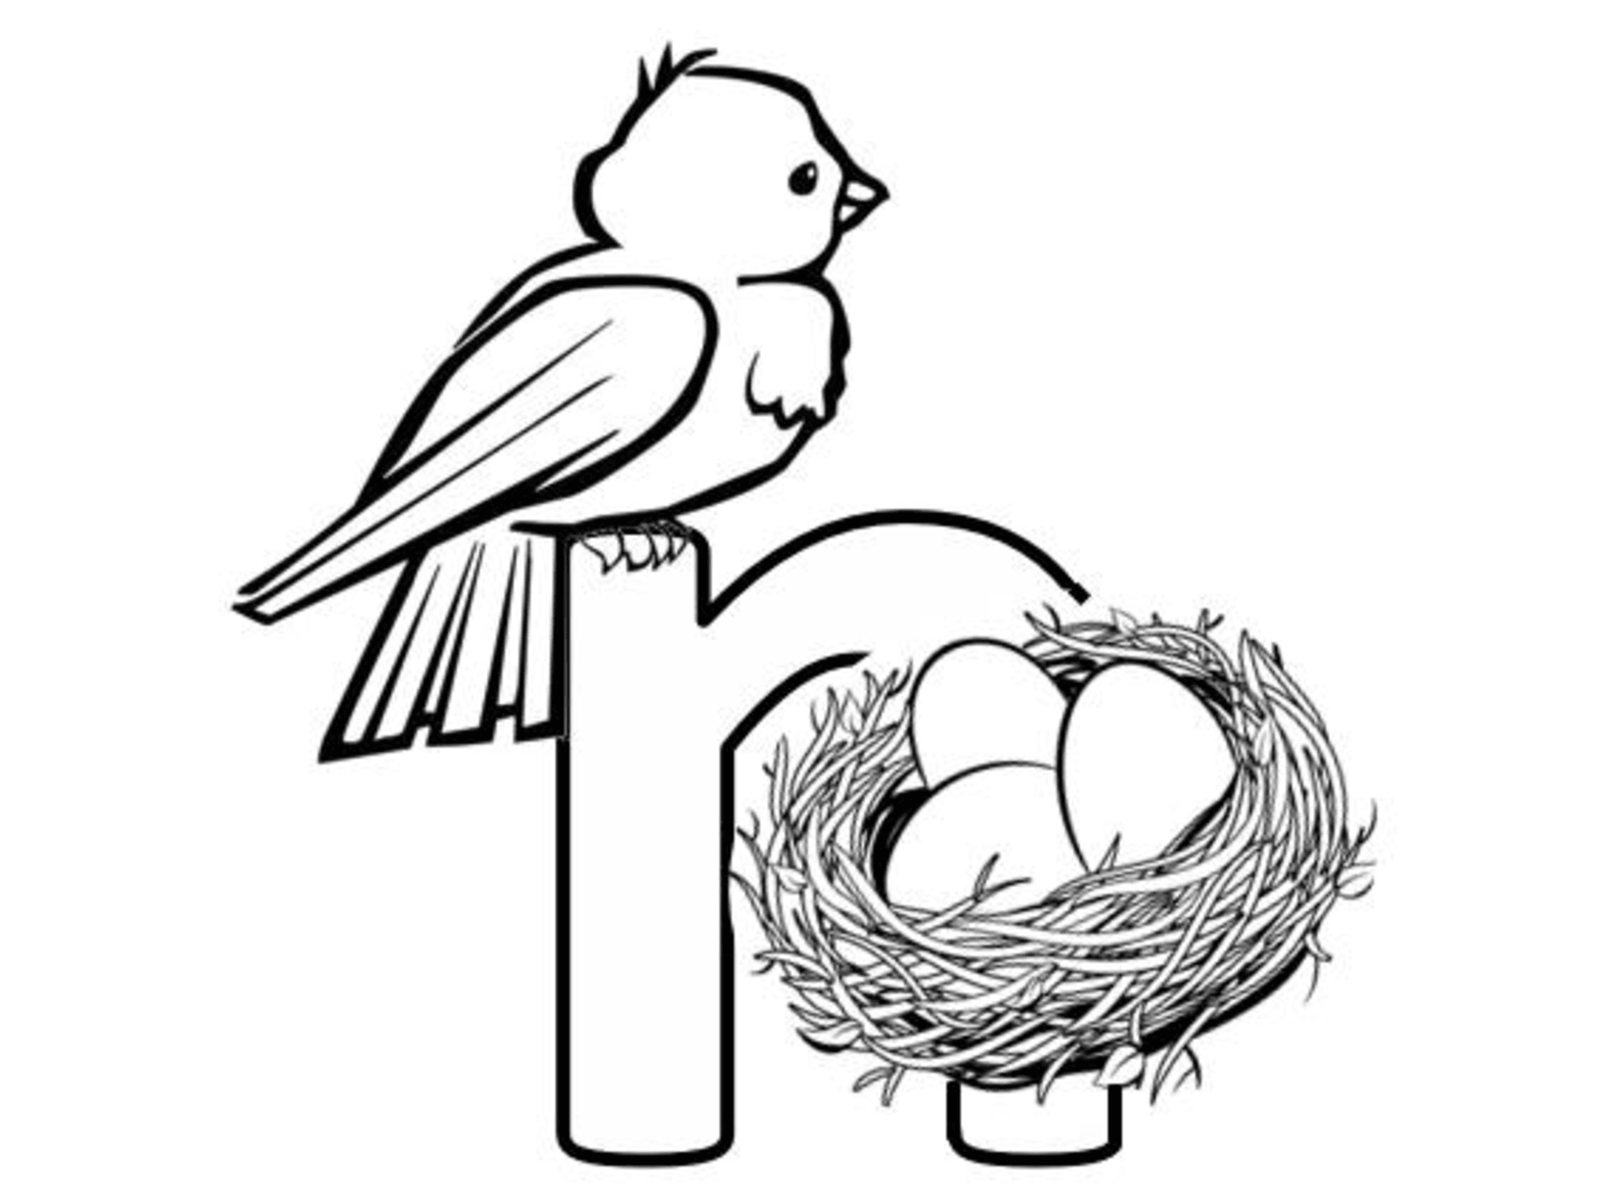 Bird perched above nest with eggs illustration.